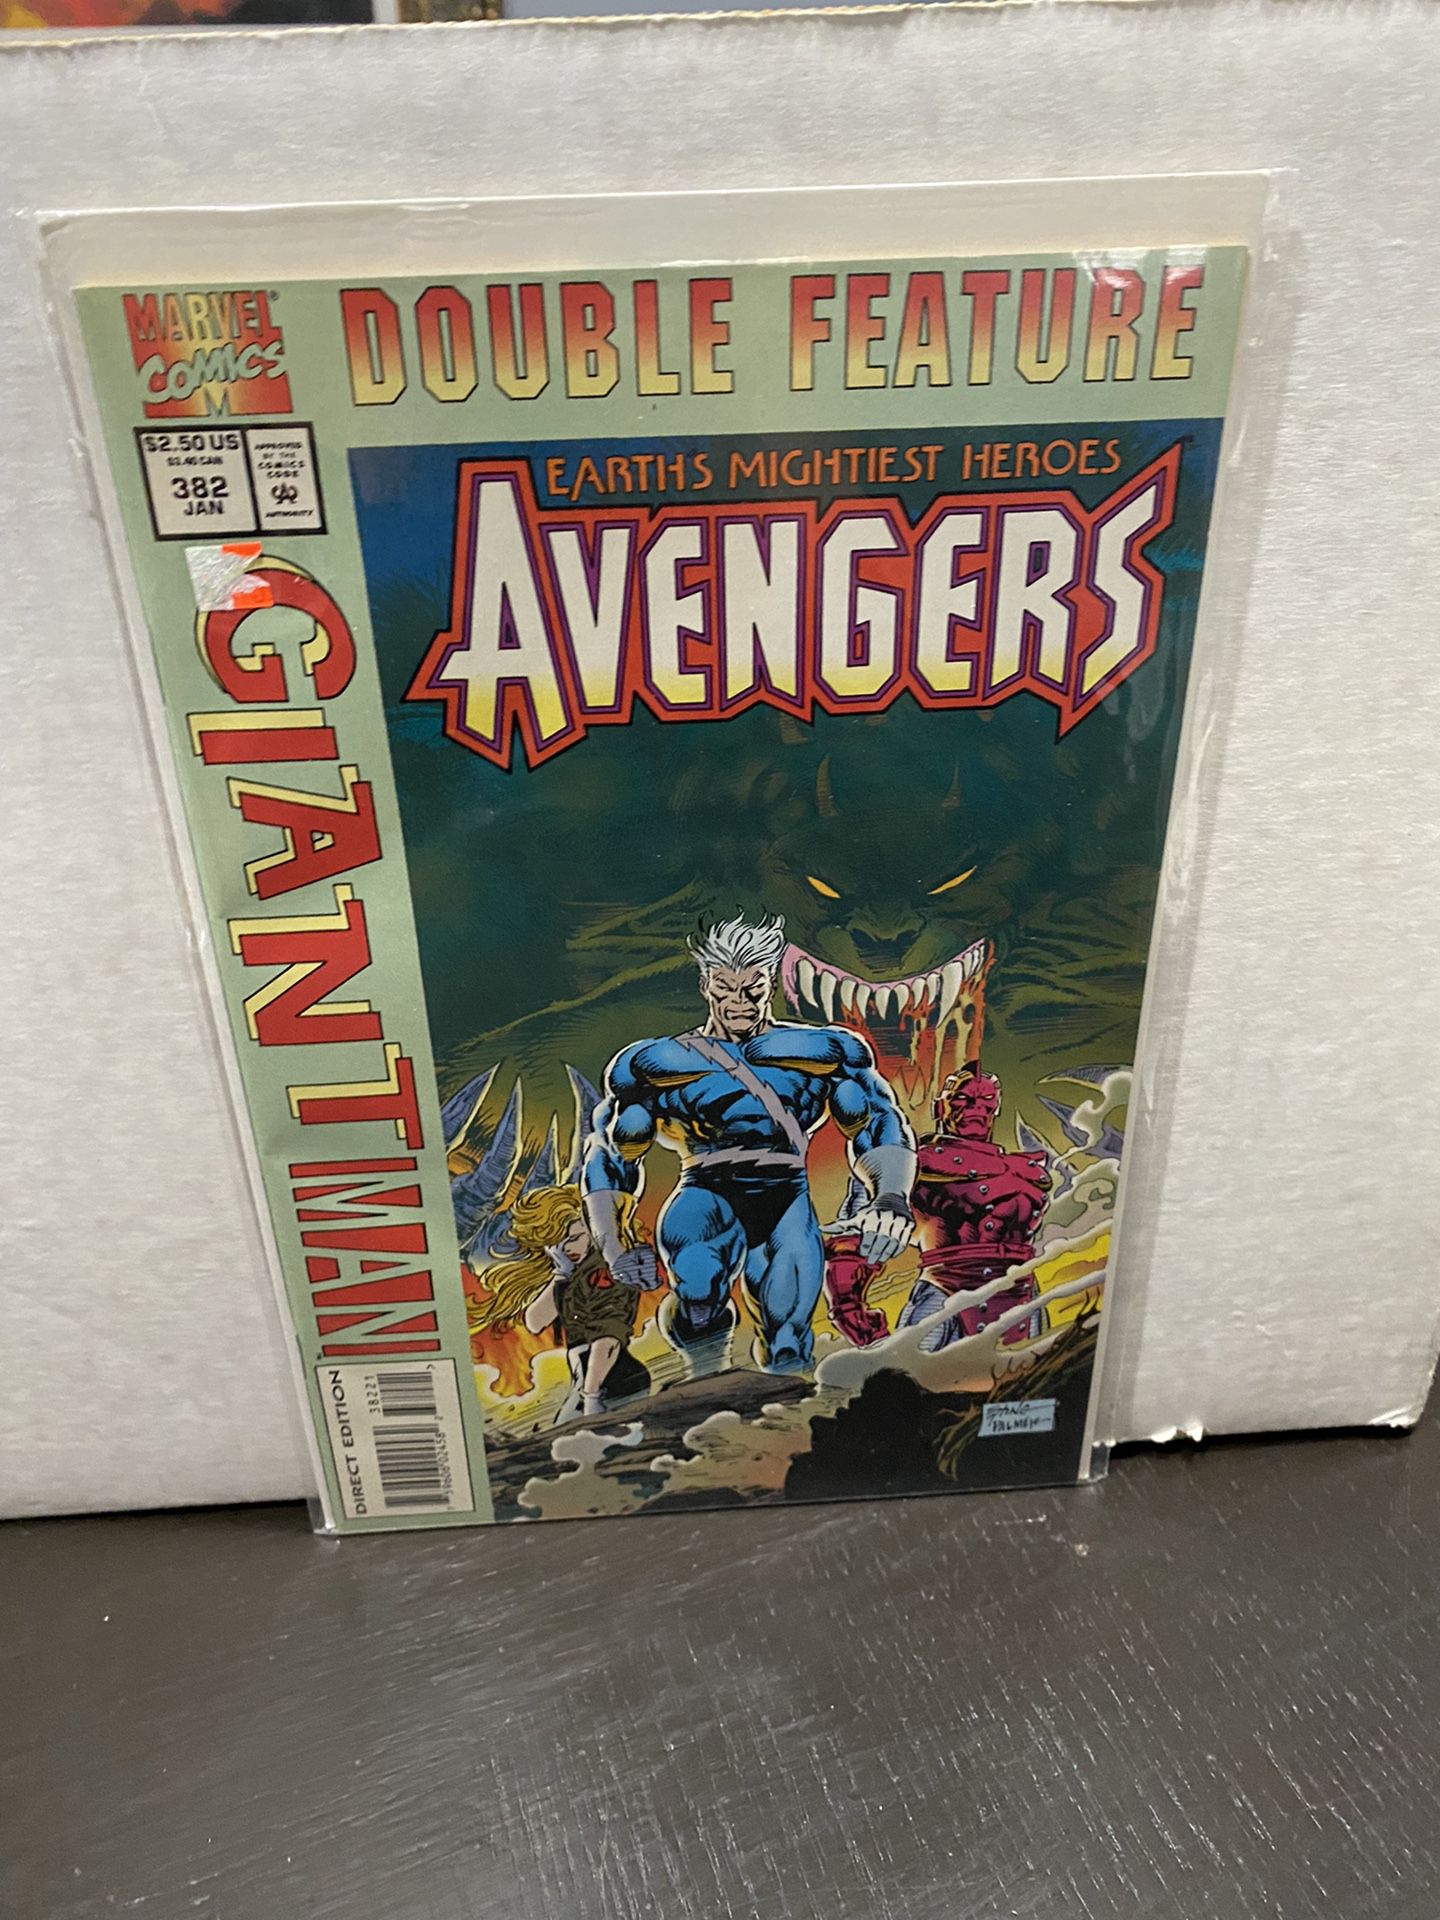 AVENGERS #382 GIANT MAN DOUBLE FEATURE FIRST PRINT MARVEL COMICS (1994) VF-